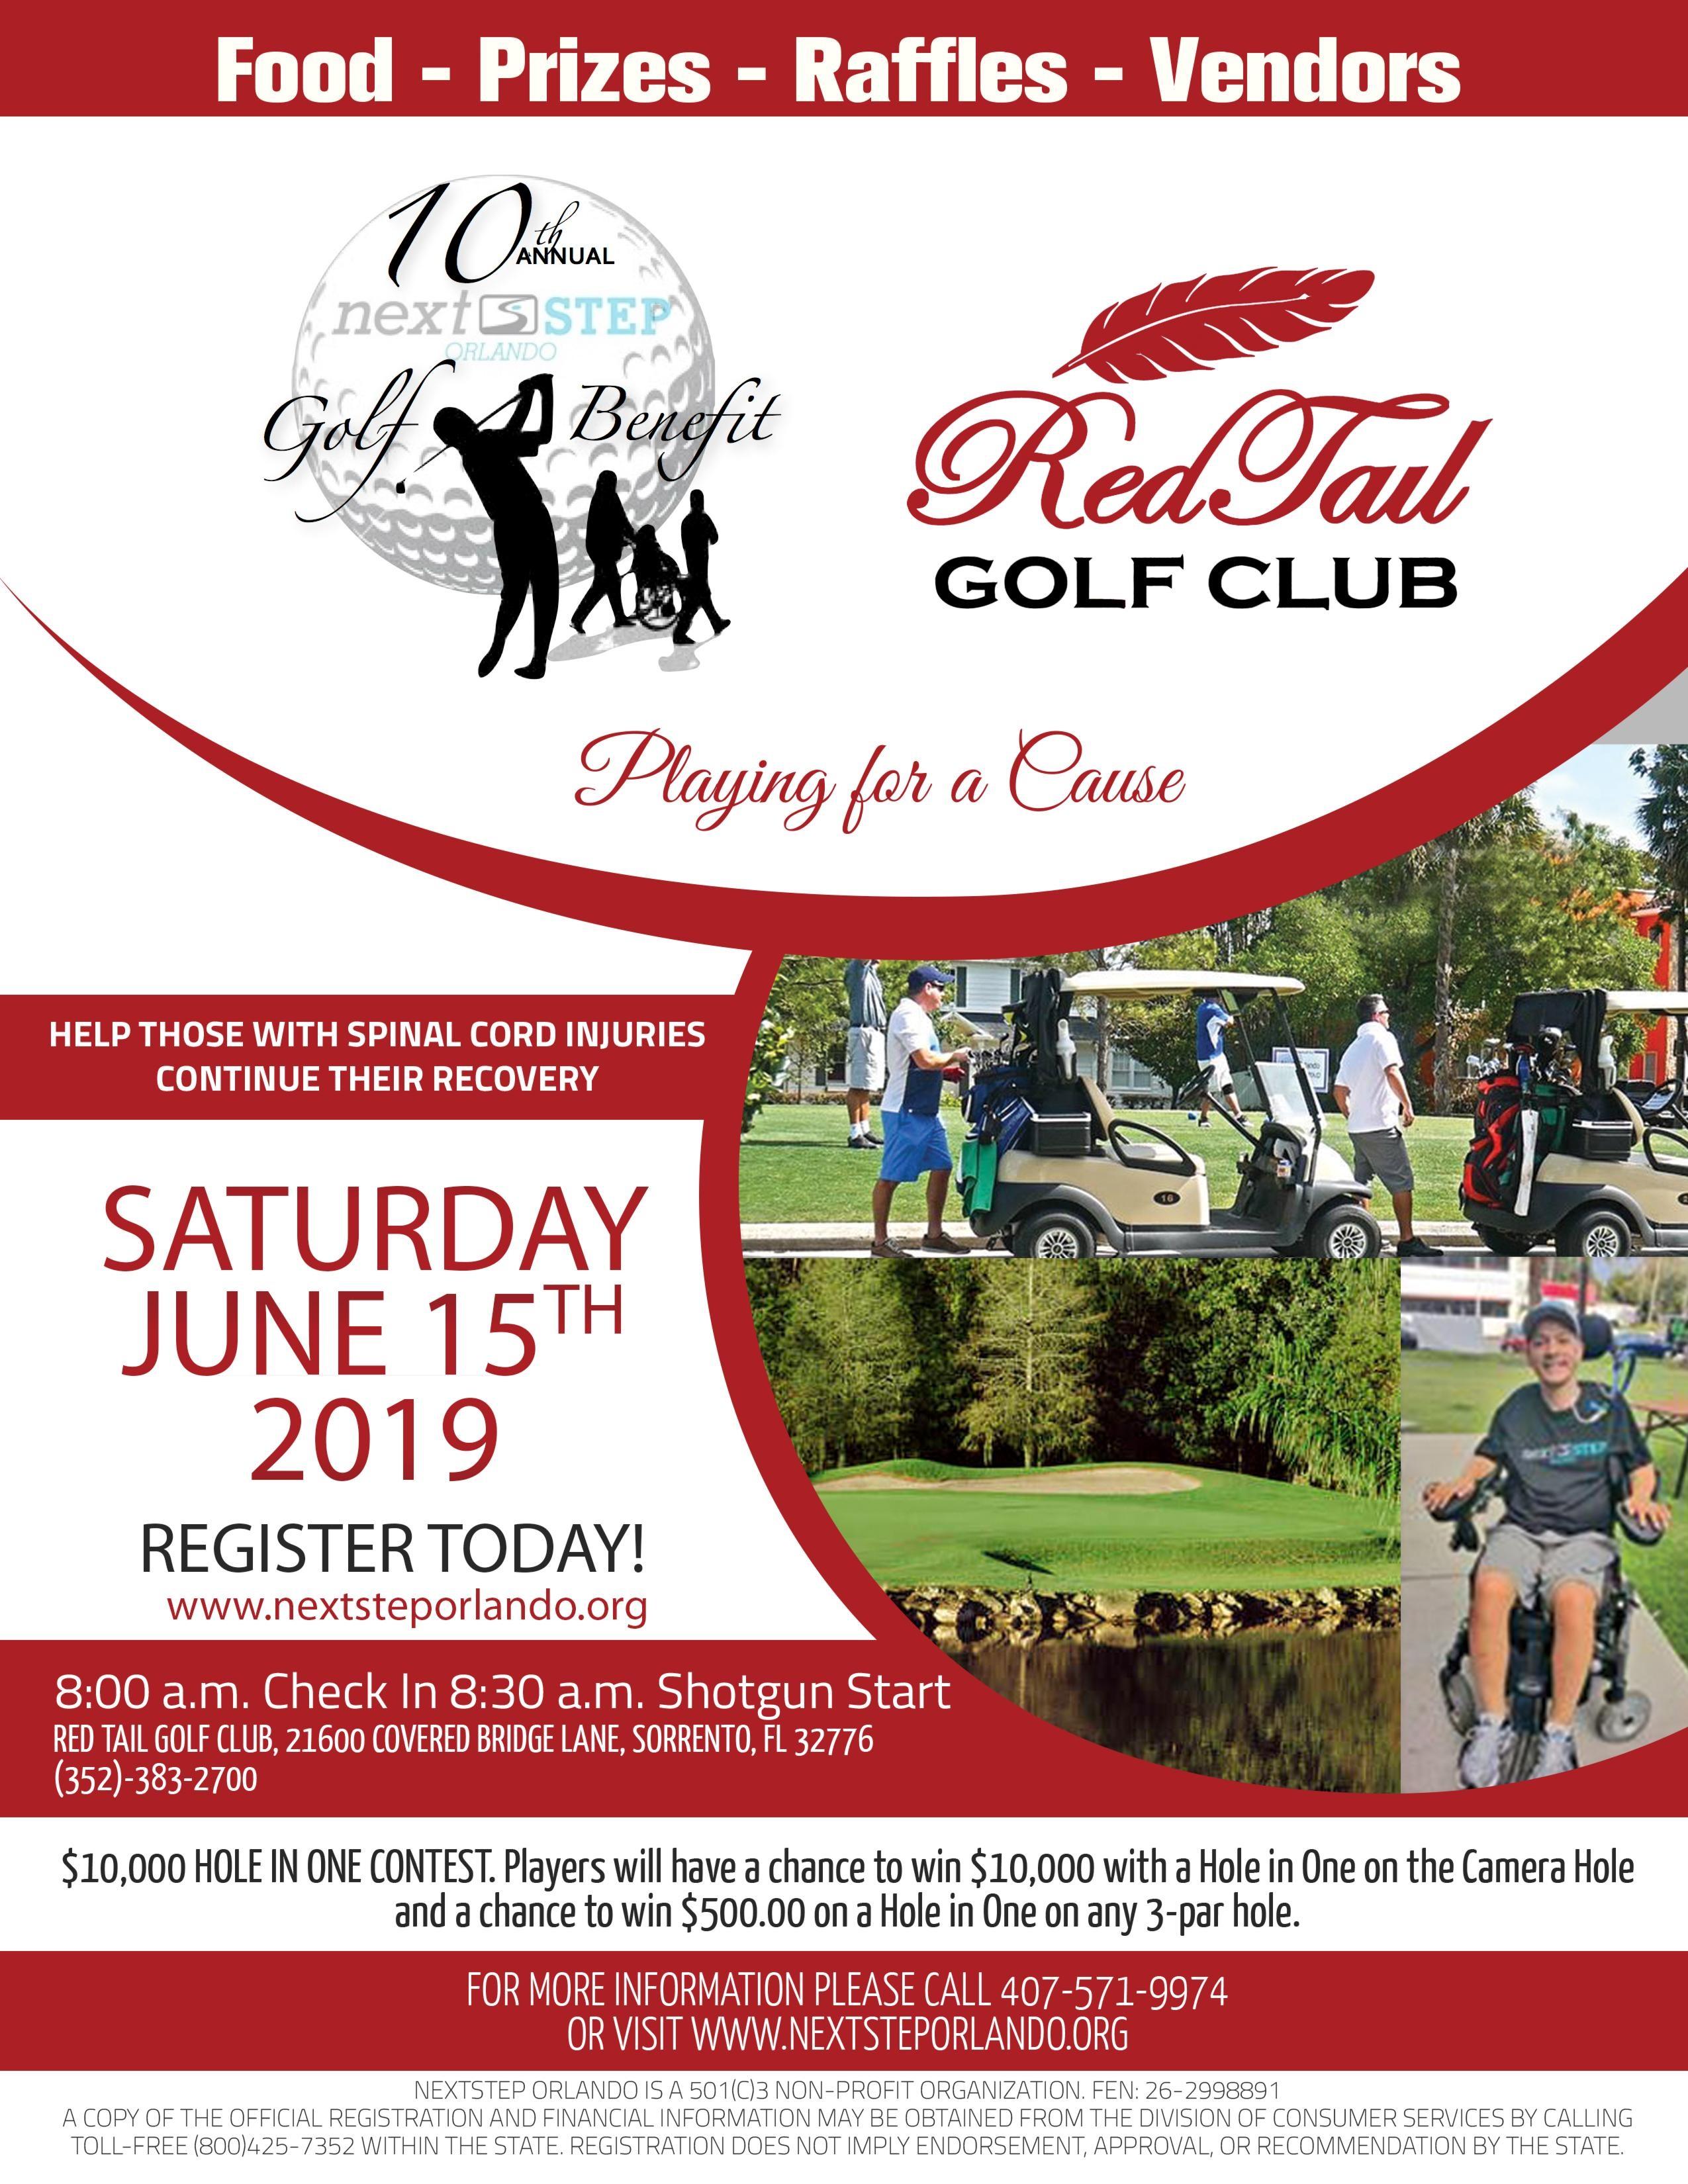 10th Annual Charity Golf Benefit